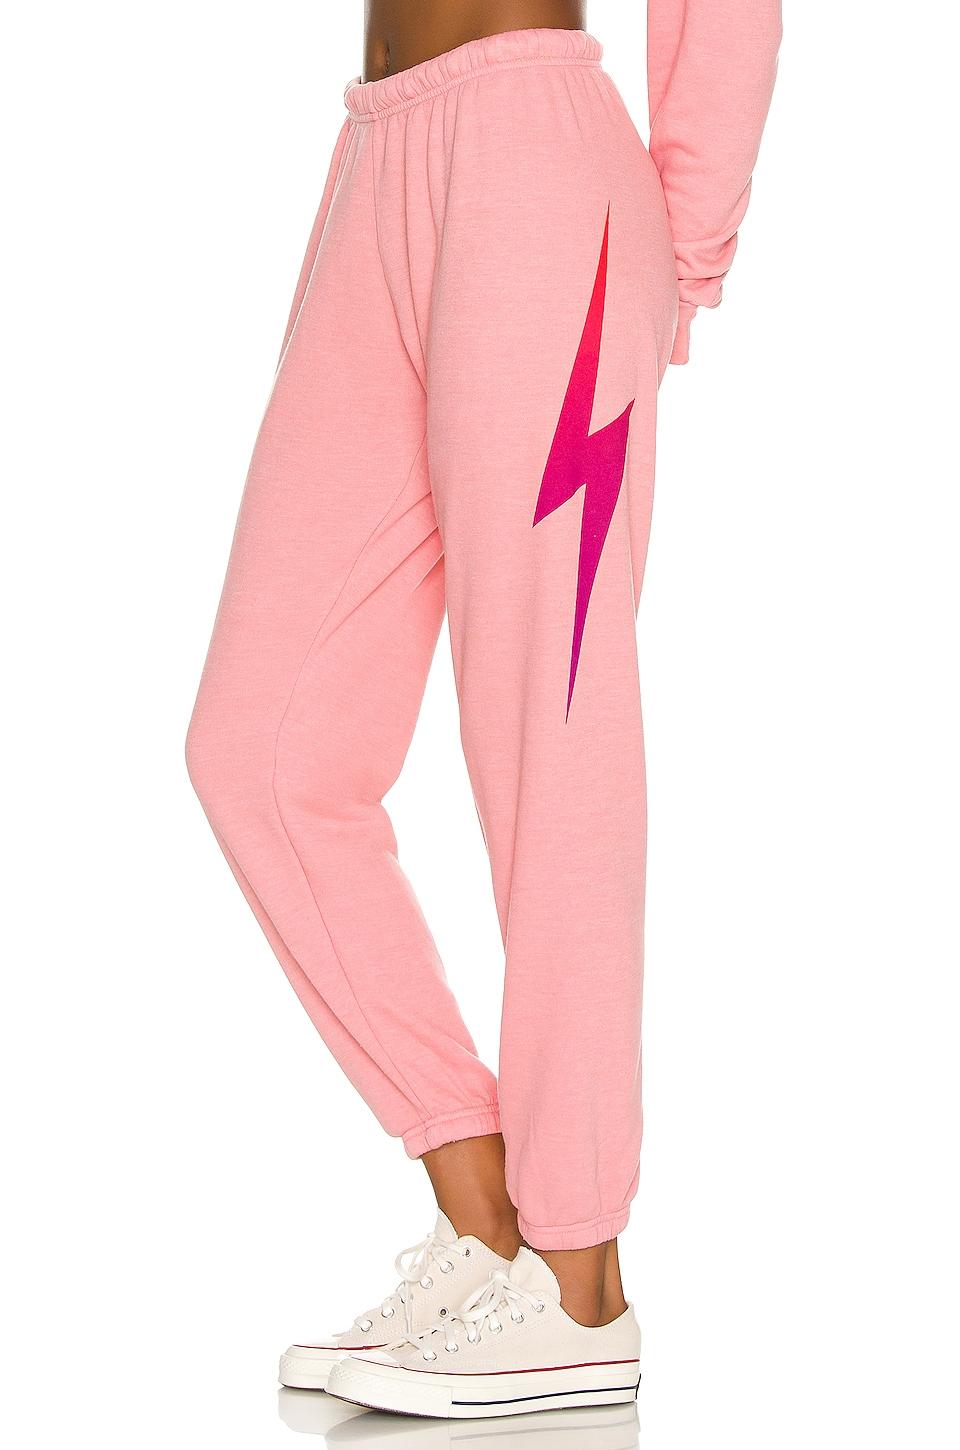 Aviator Nation Bolt Fade Sweatpants in Pink